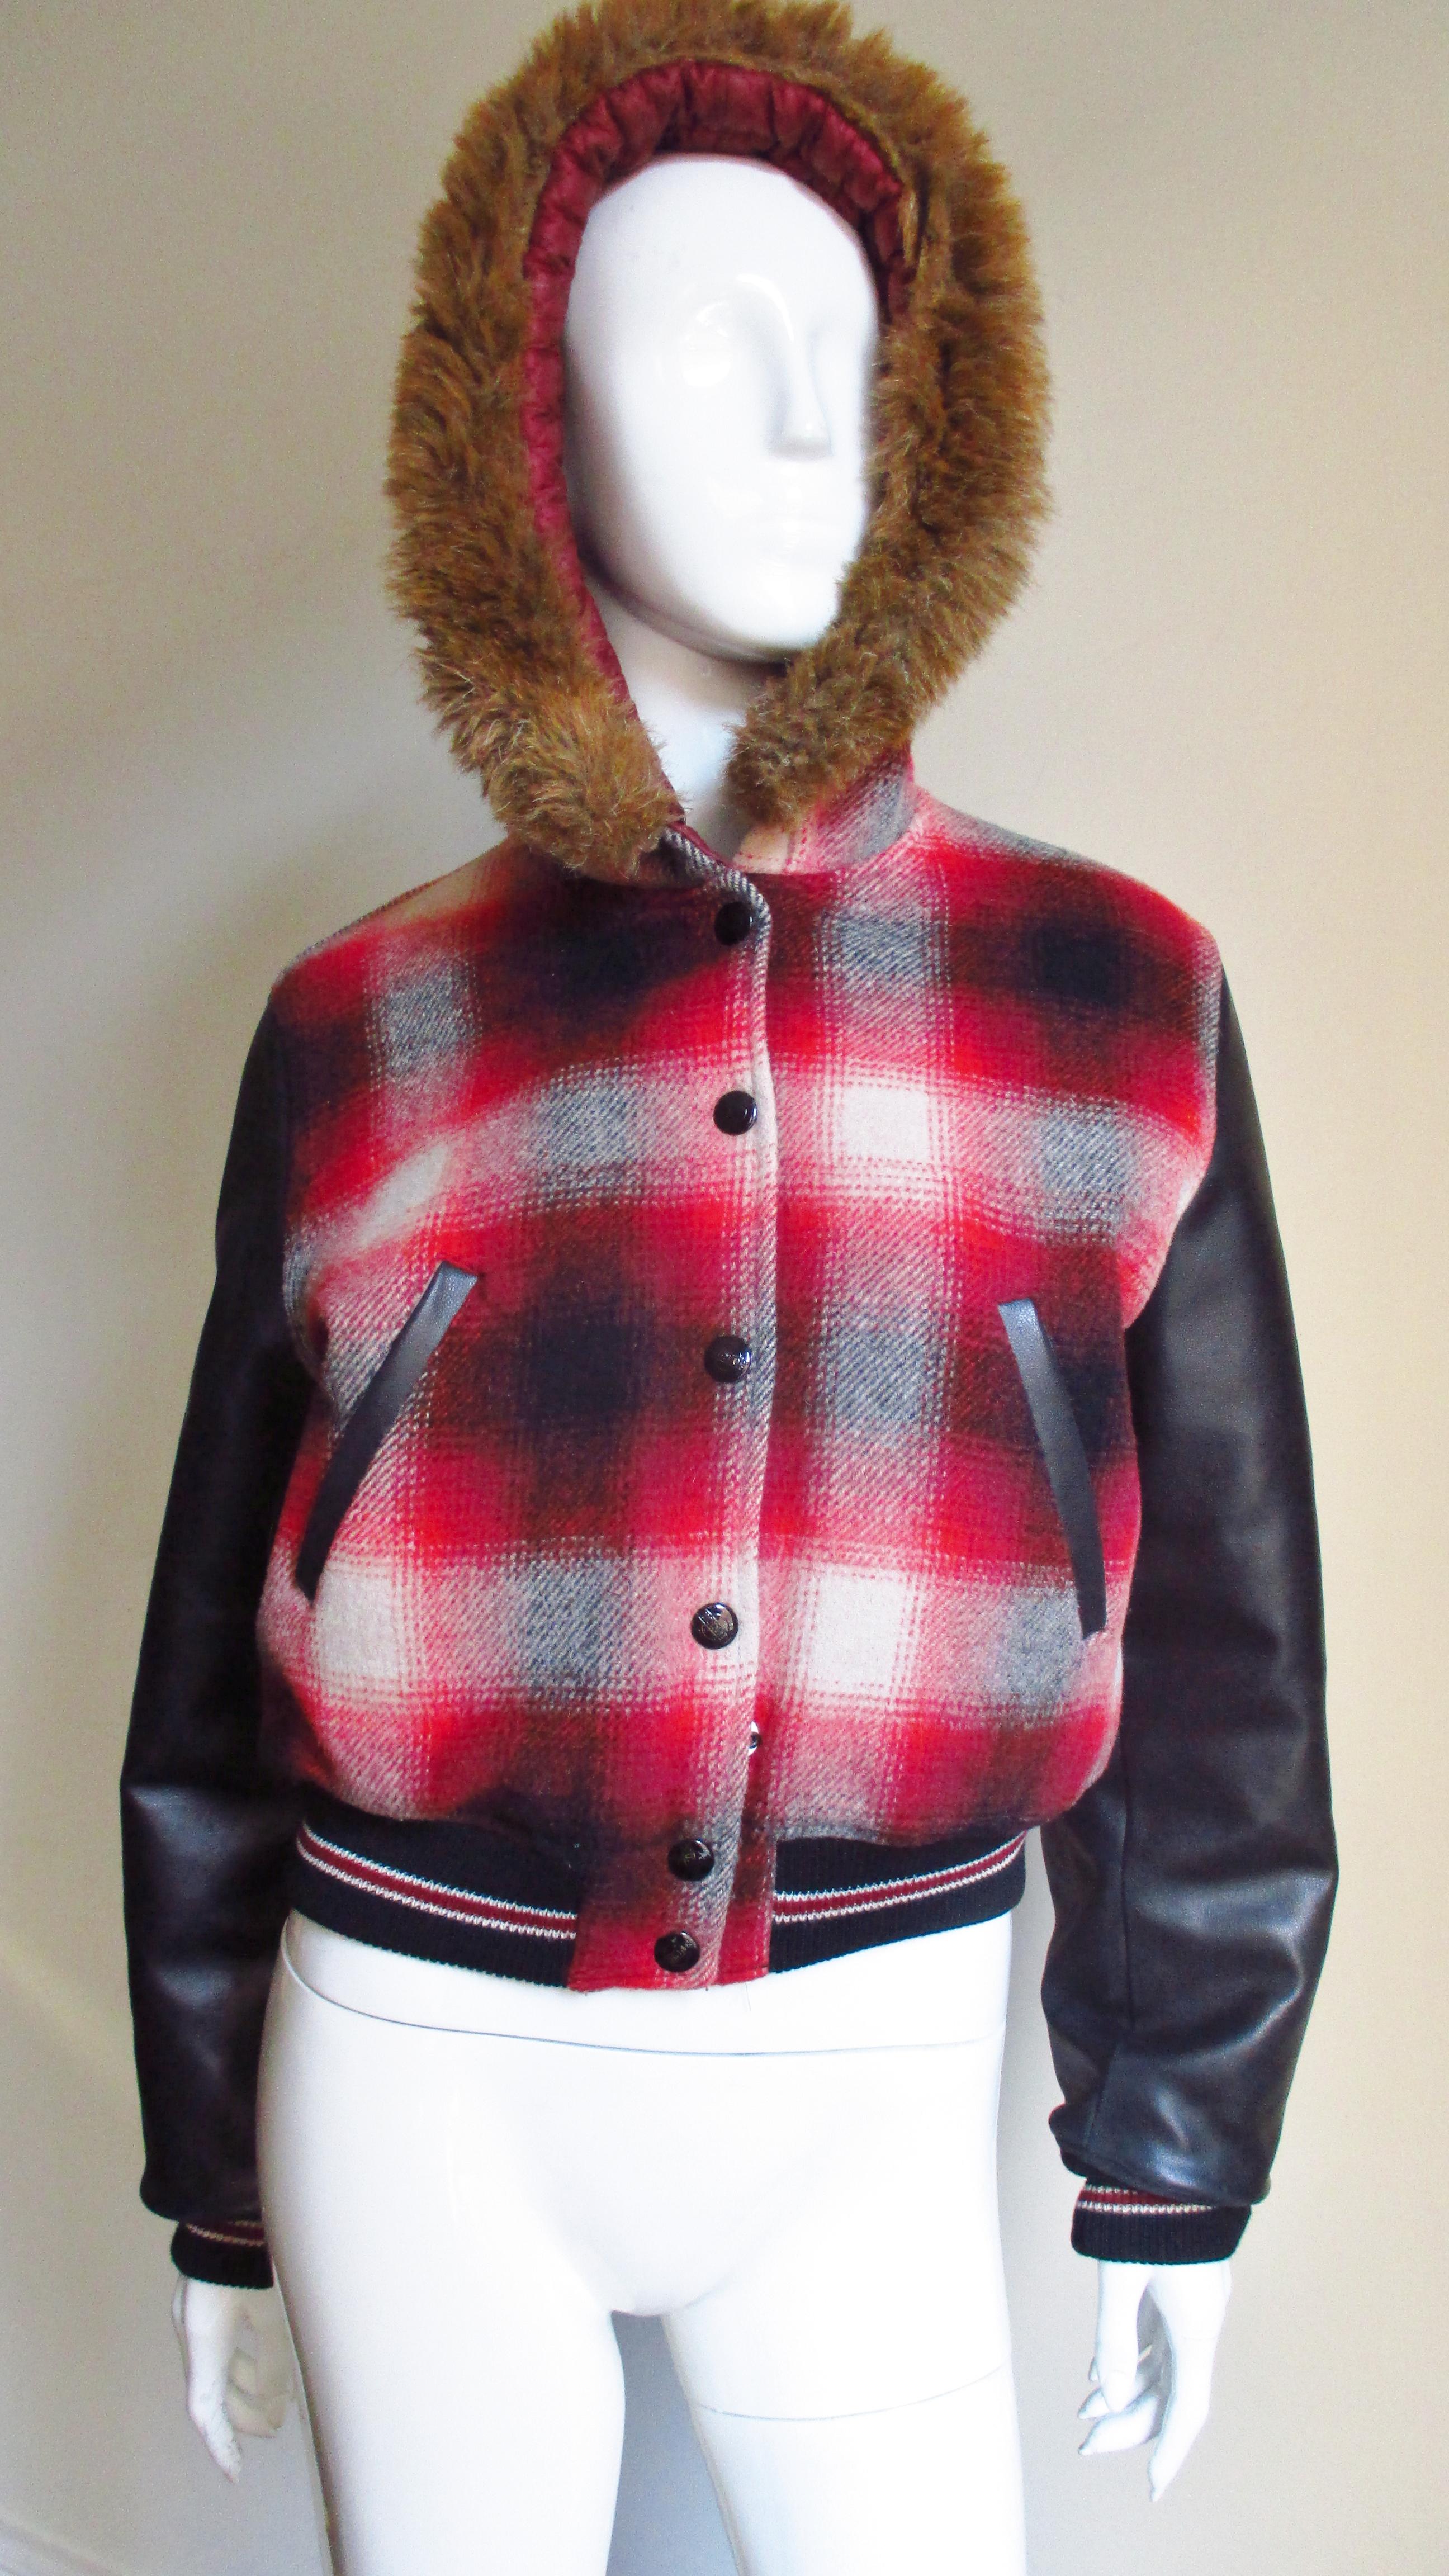 A great watch plaid red white and grey wool jacket with pleather sleeves and faux fur trim from Jean Paul  Gaultier's Junior Gaultier.  It is a bomber style jacket with long black faux leather sleeves and stripped 2